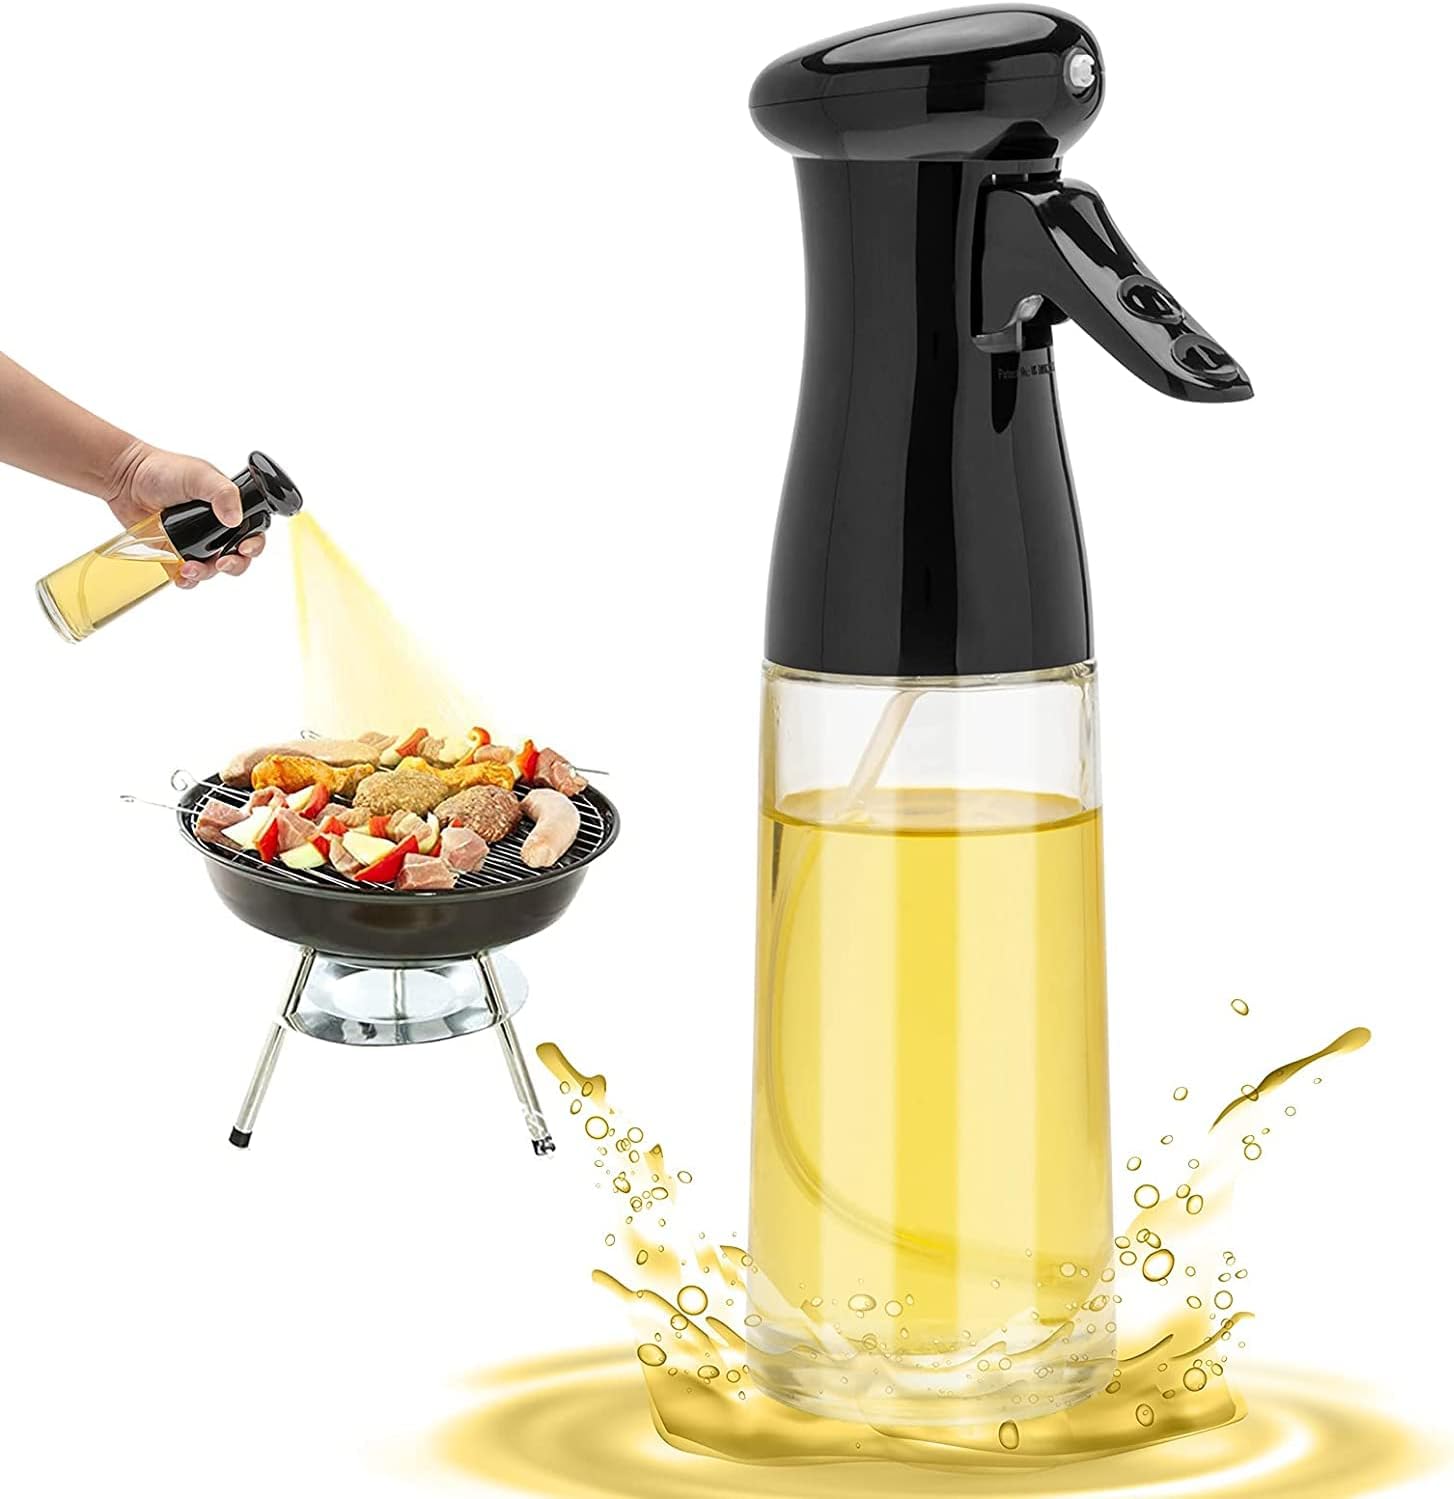 Olive Oil Sprayer for Cooking - 200ml Glass Oil [...]